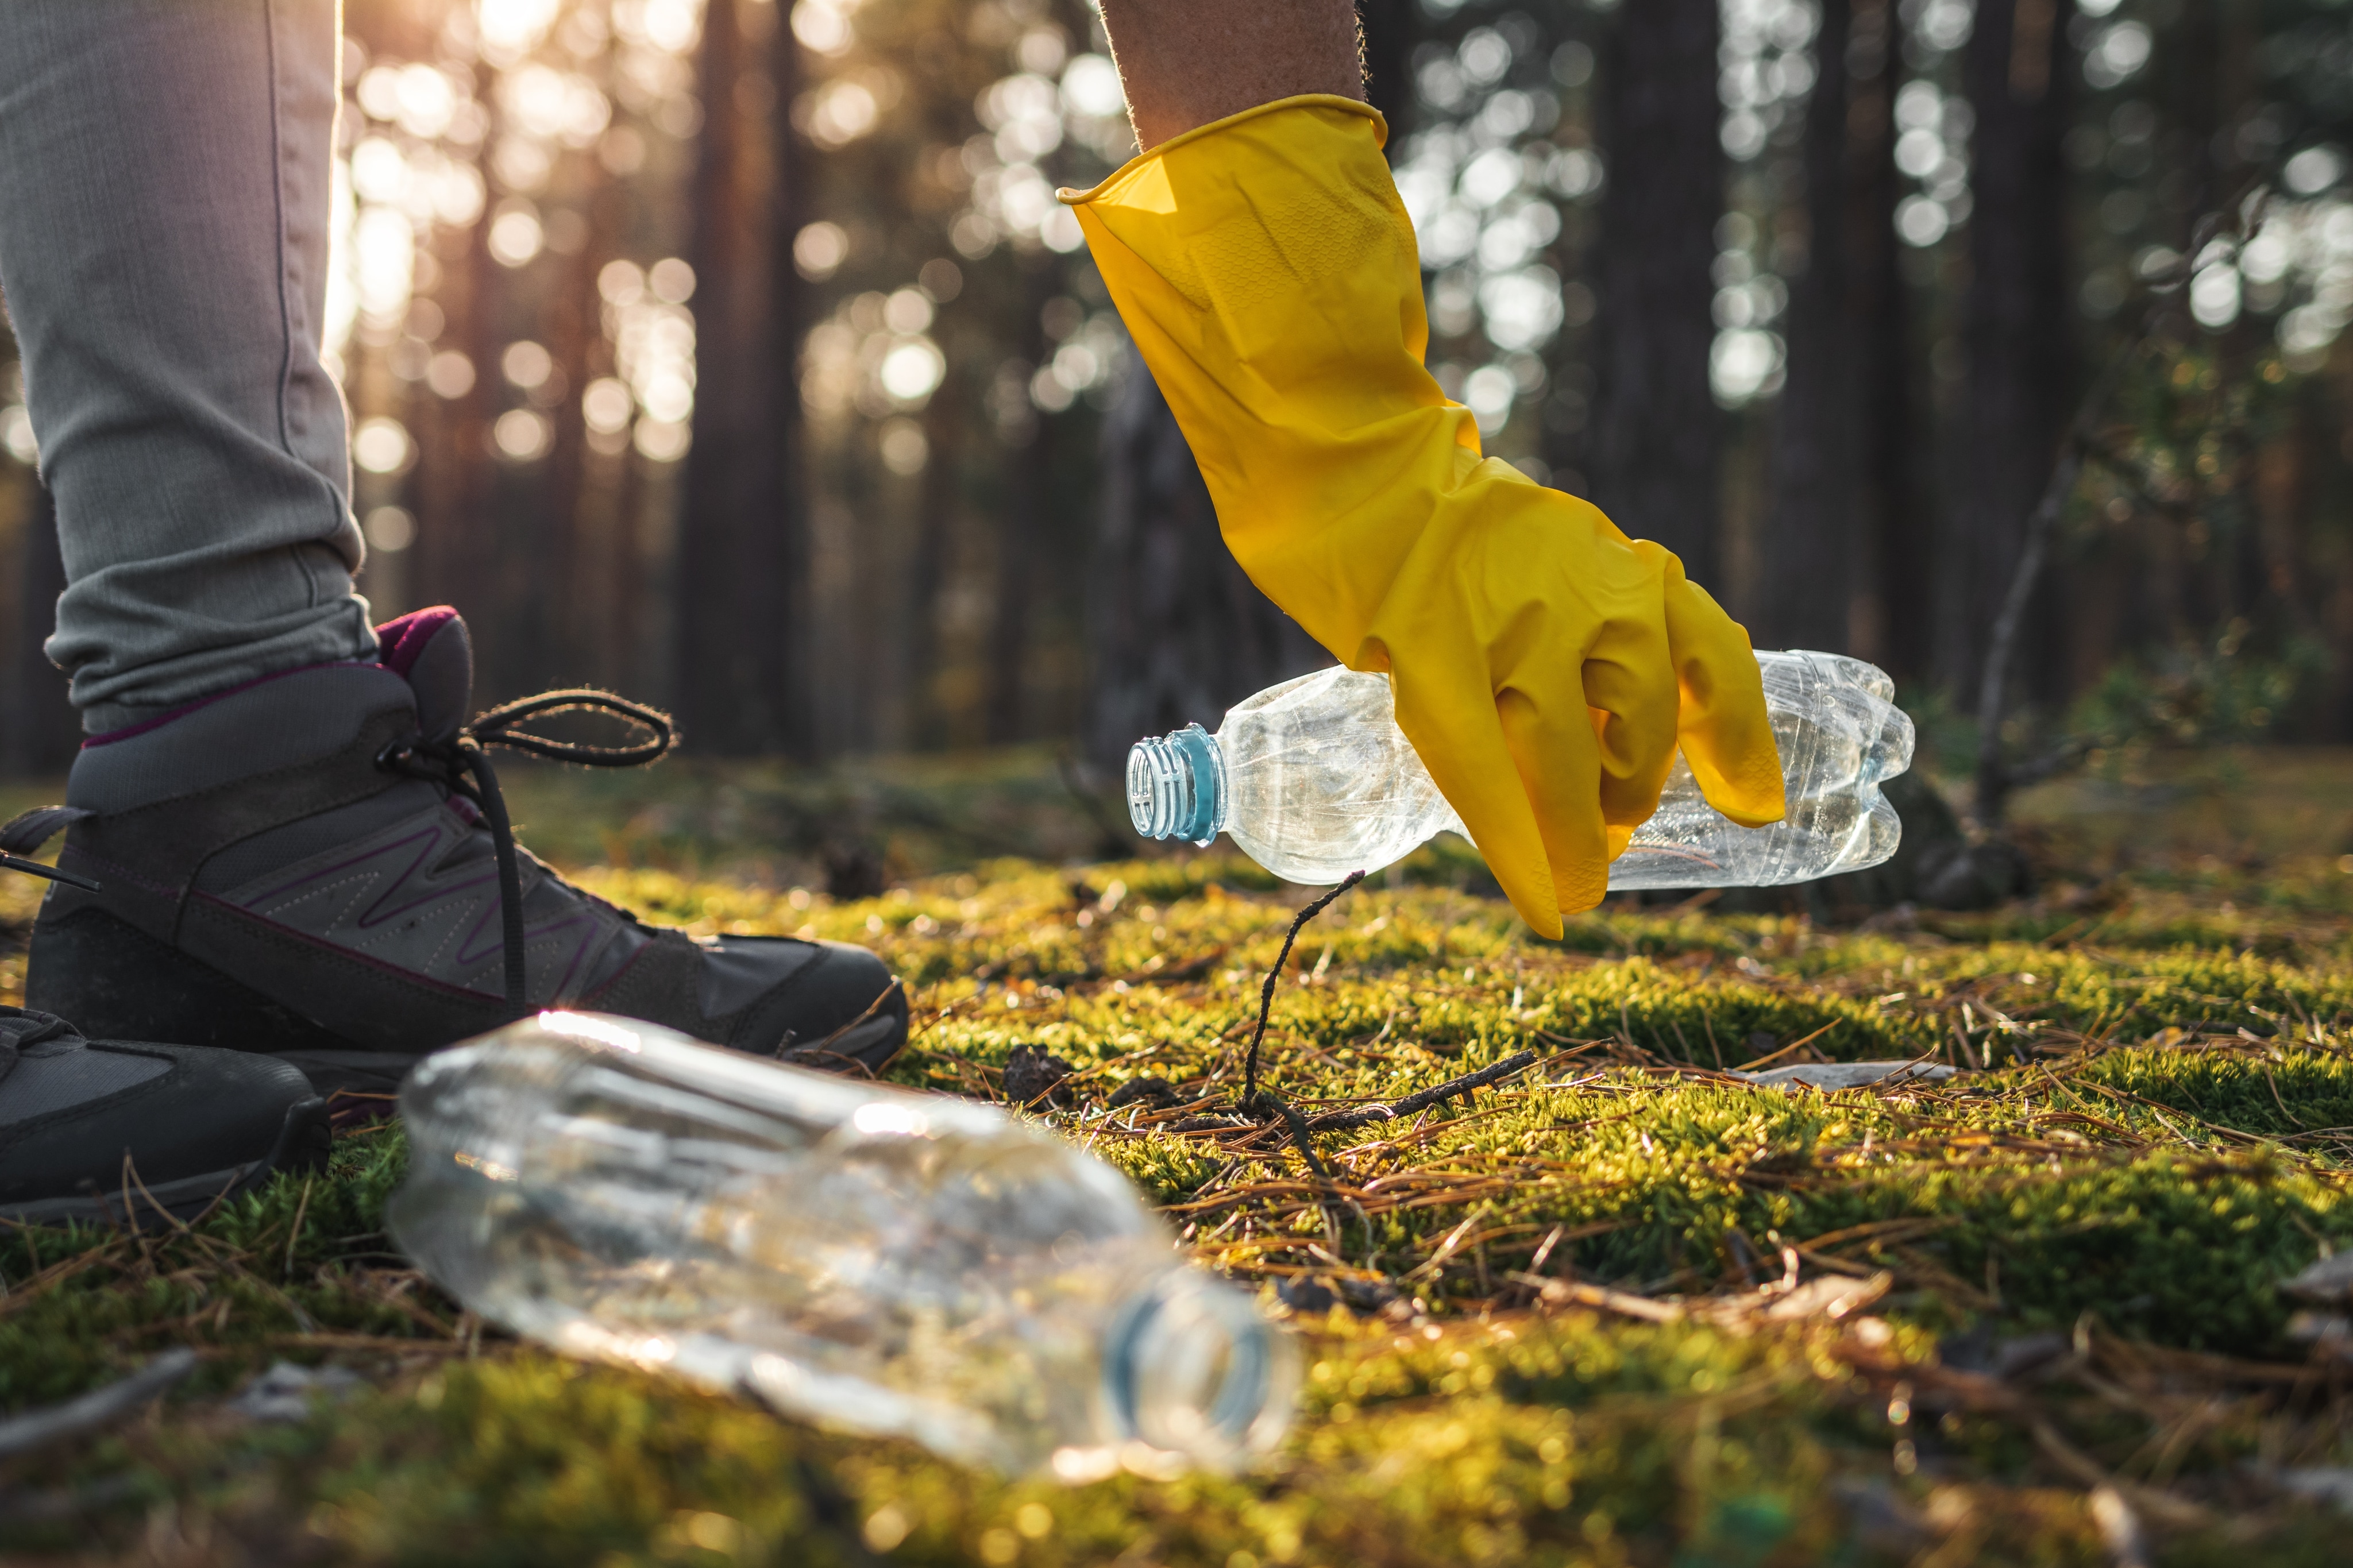 A person wearing hiking boots and a yellow glove picks up a plastic water bottle in a forest. There is another plastic water bottle nearby. 